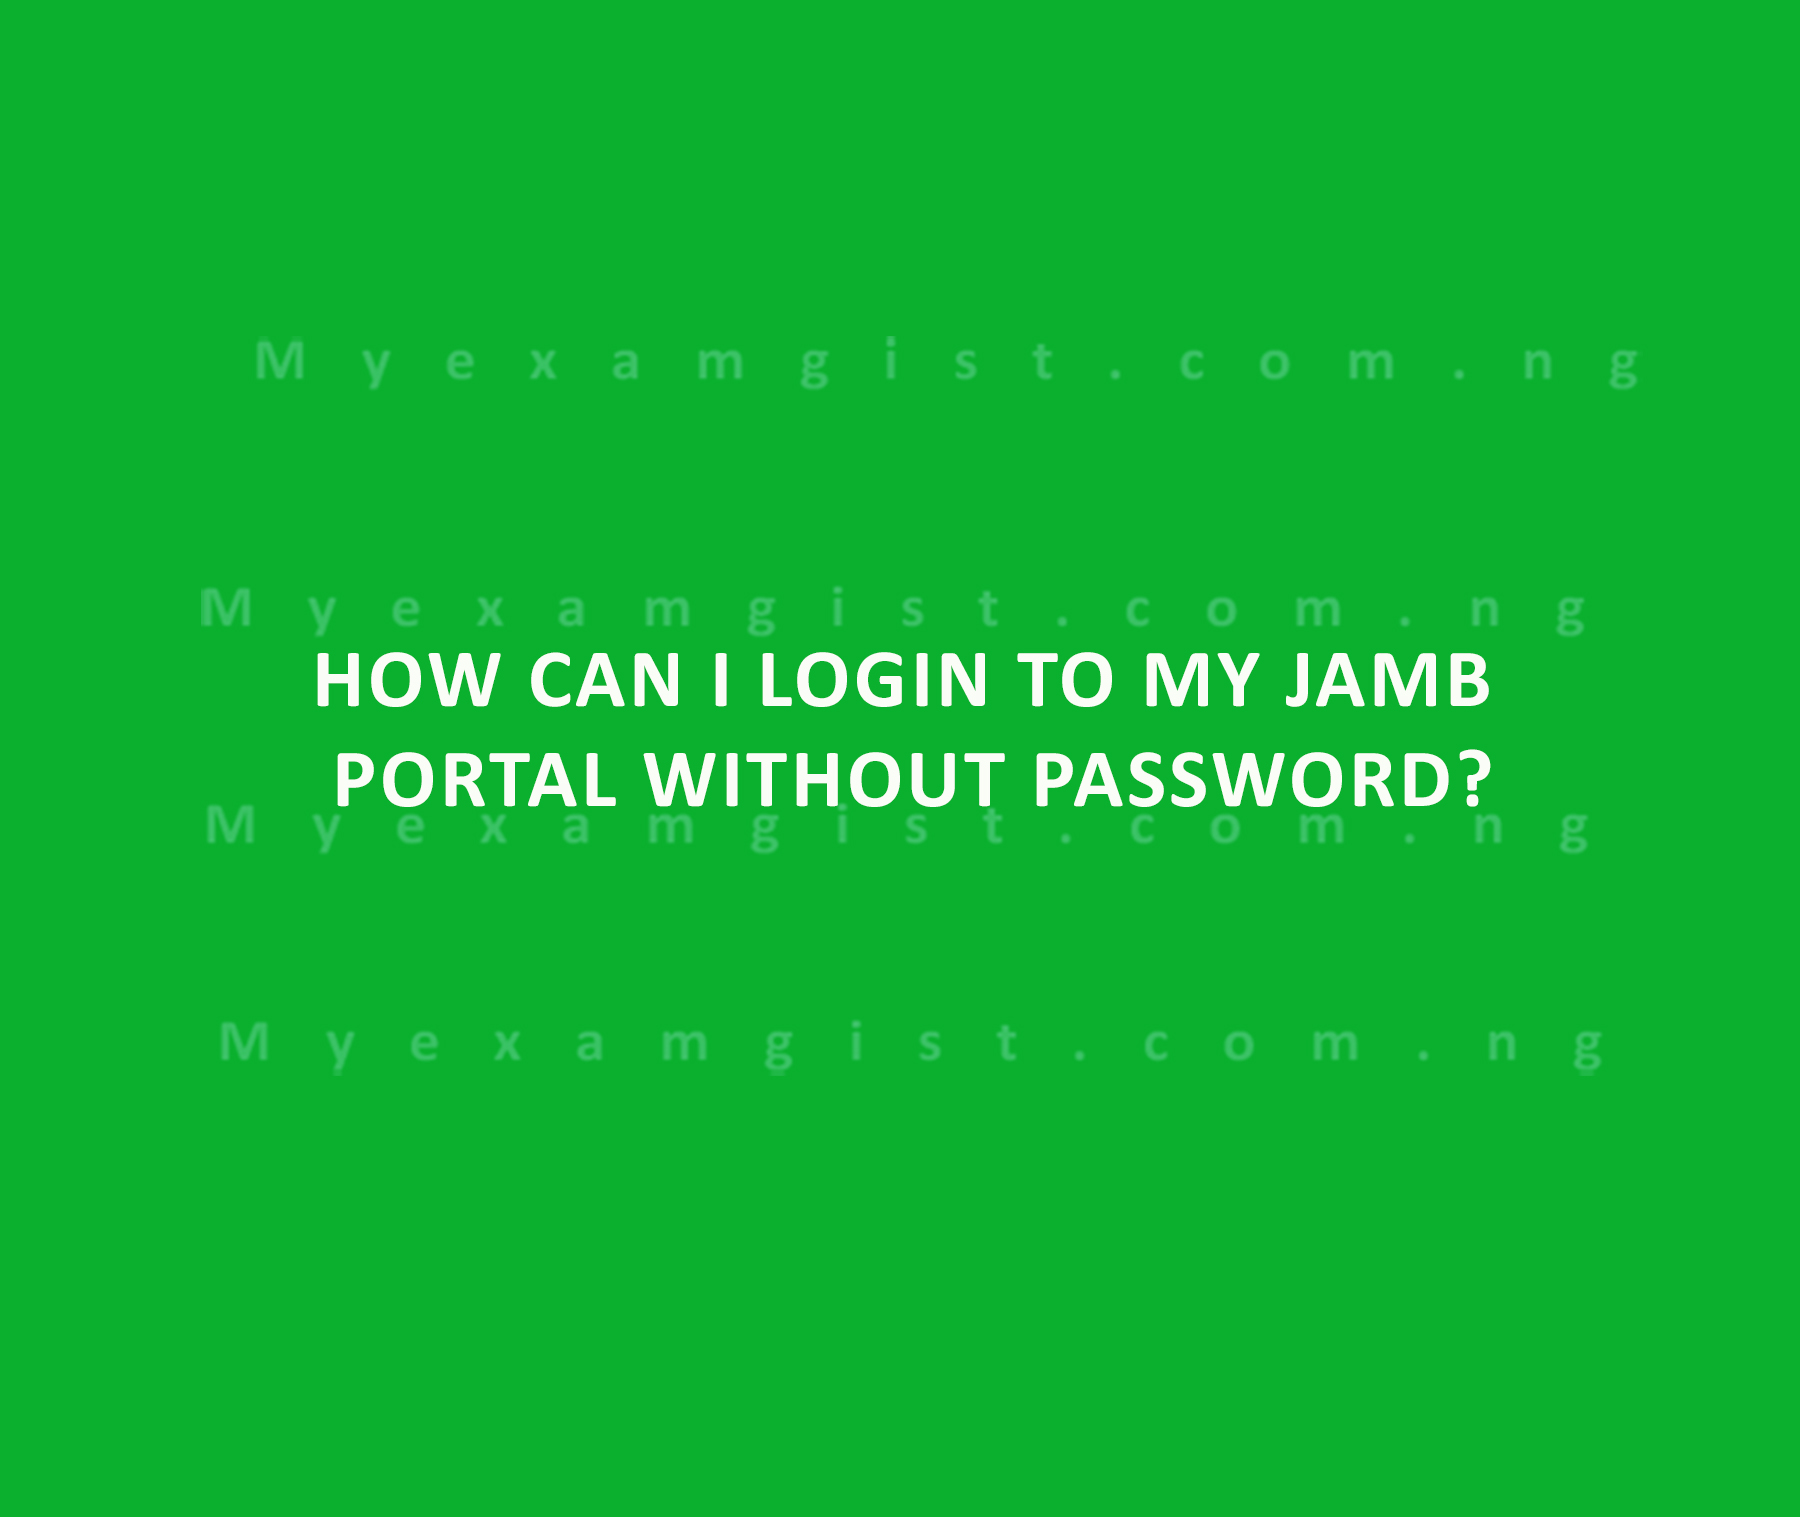 How can I login to my JAMB portal without password?